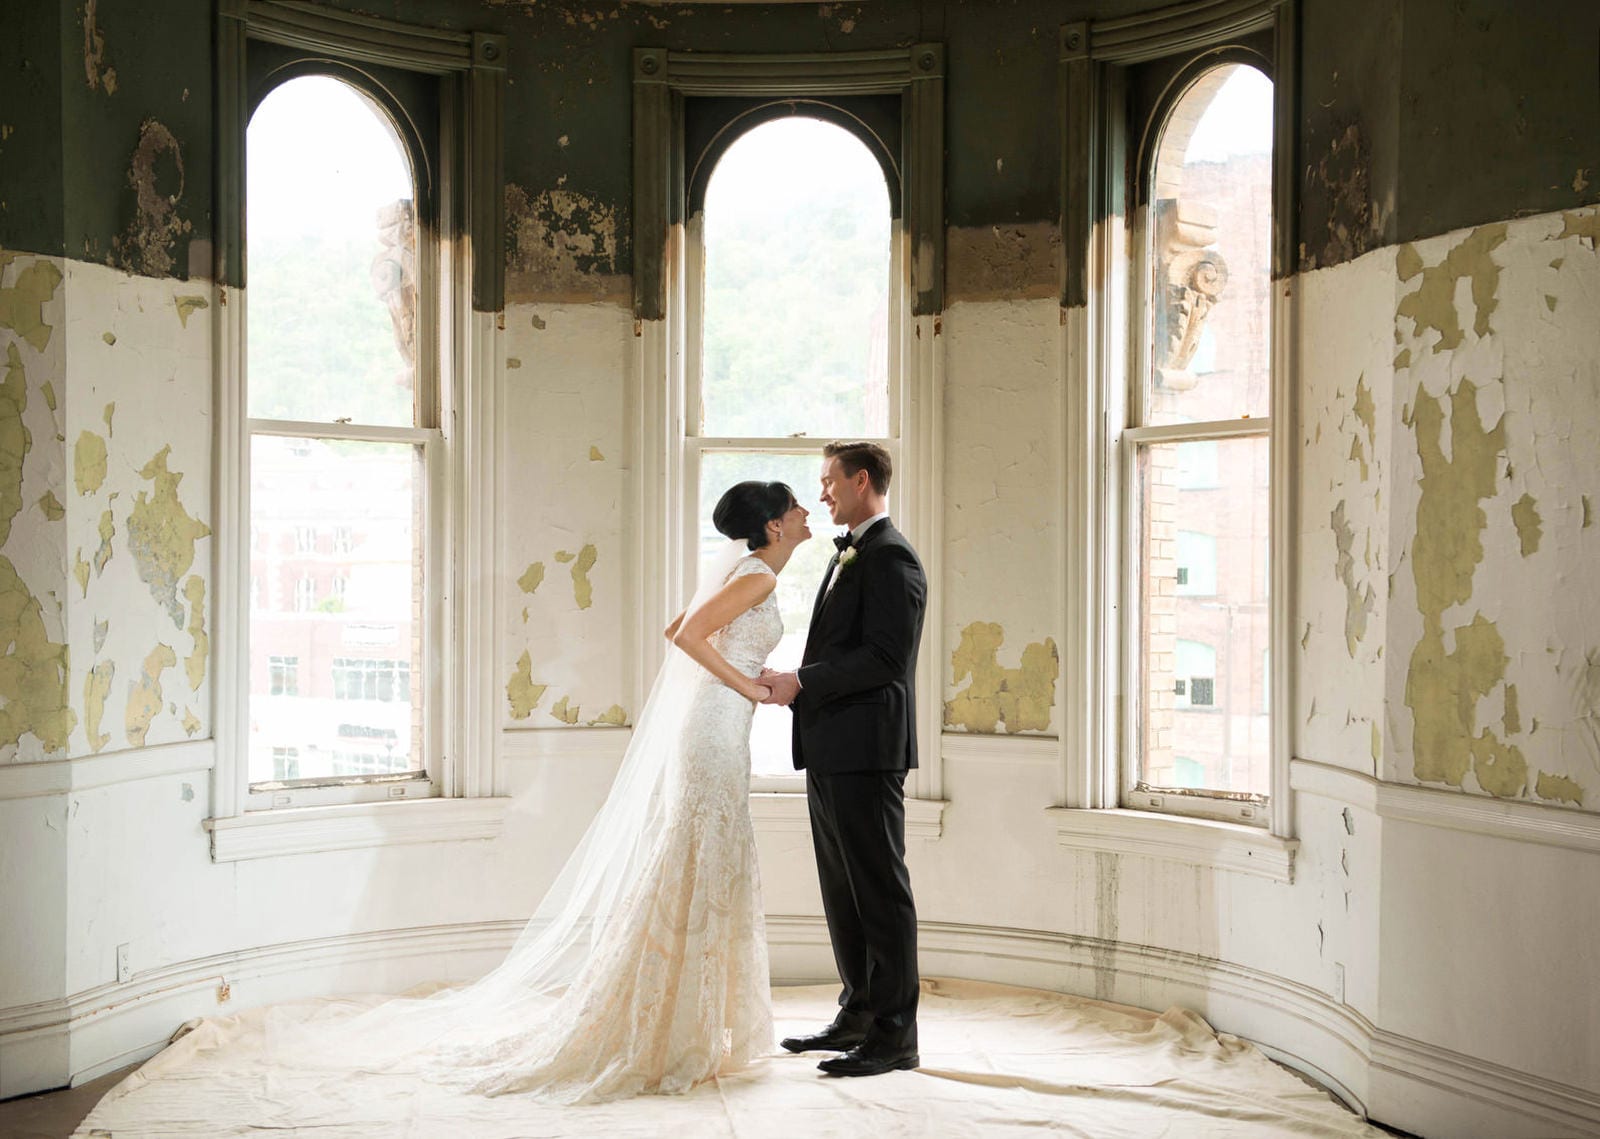 A bride and groom stand face-to-face in front of three tall arched windows in an old room with peeling paint.